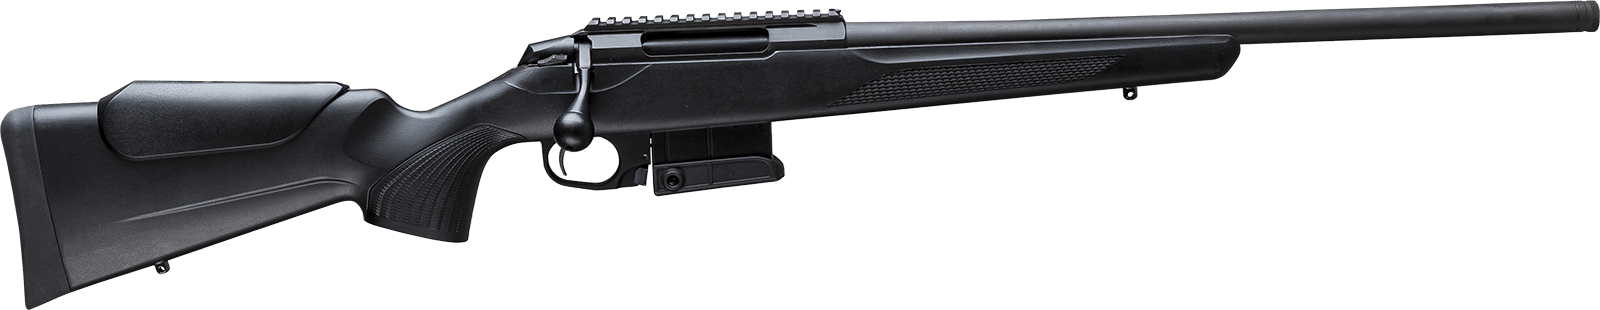 ficheros/productos/37135rifle-tikka-t3x-ctr-compact-tactical-1.png